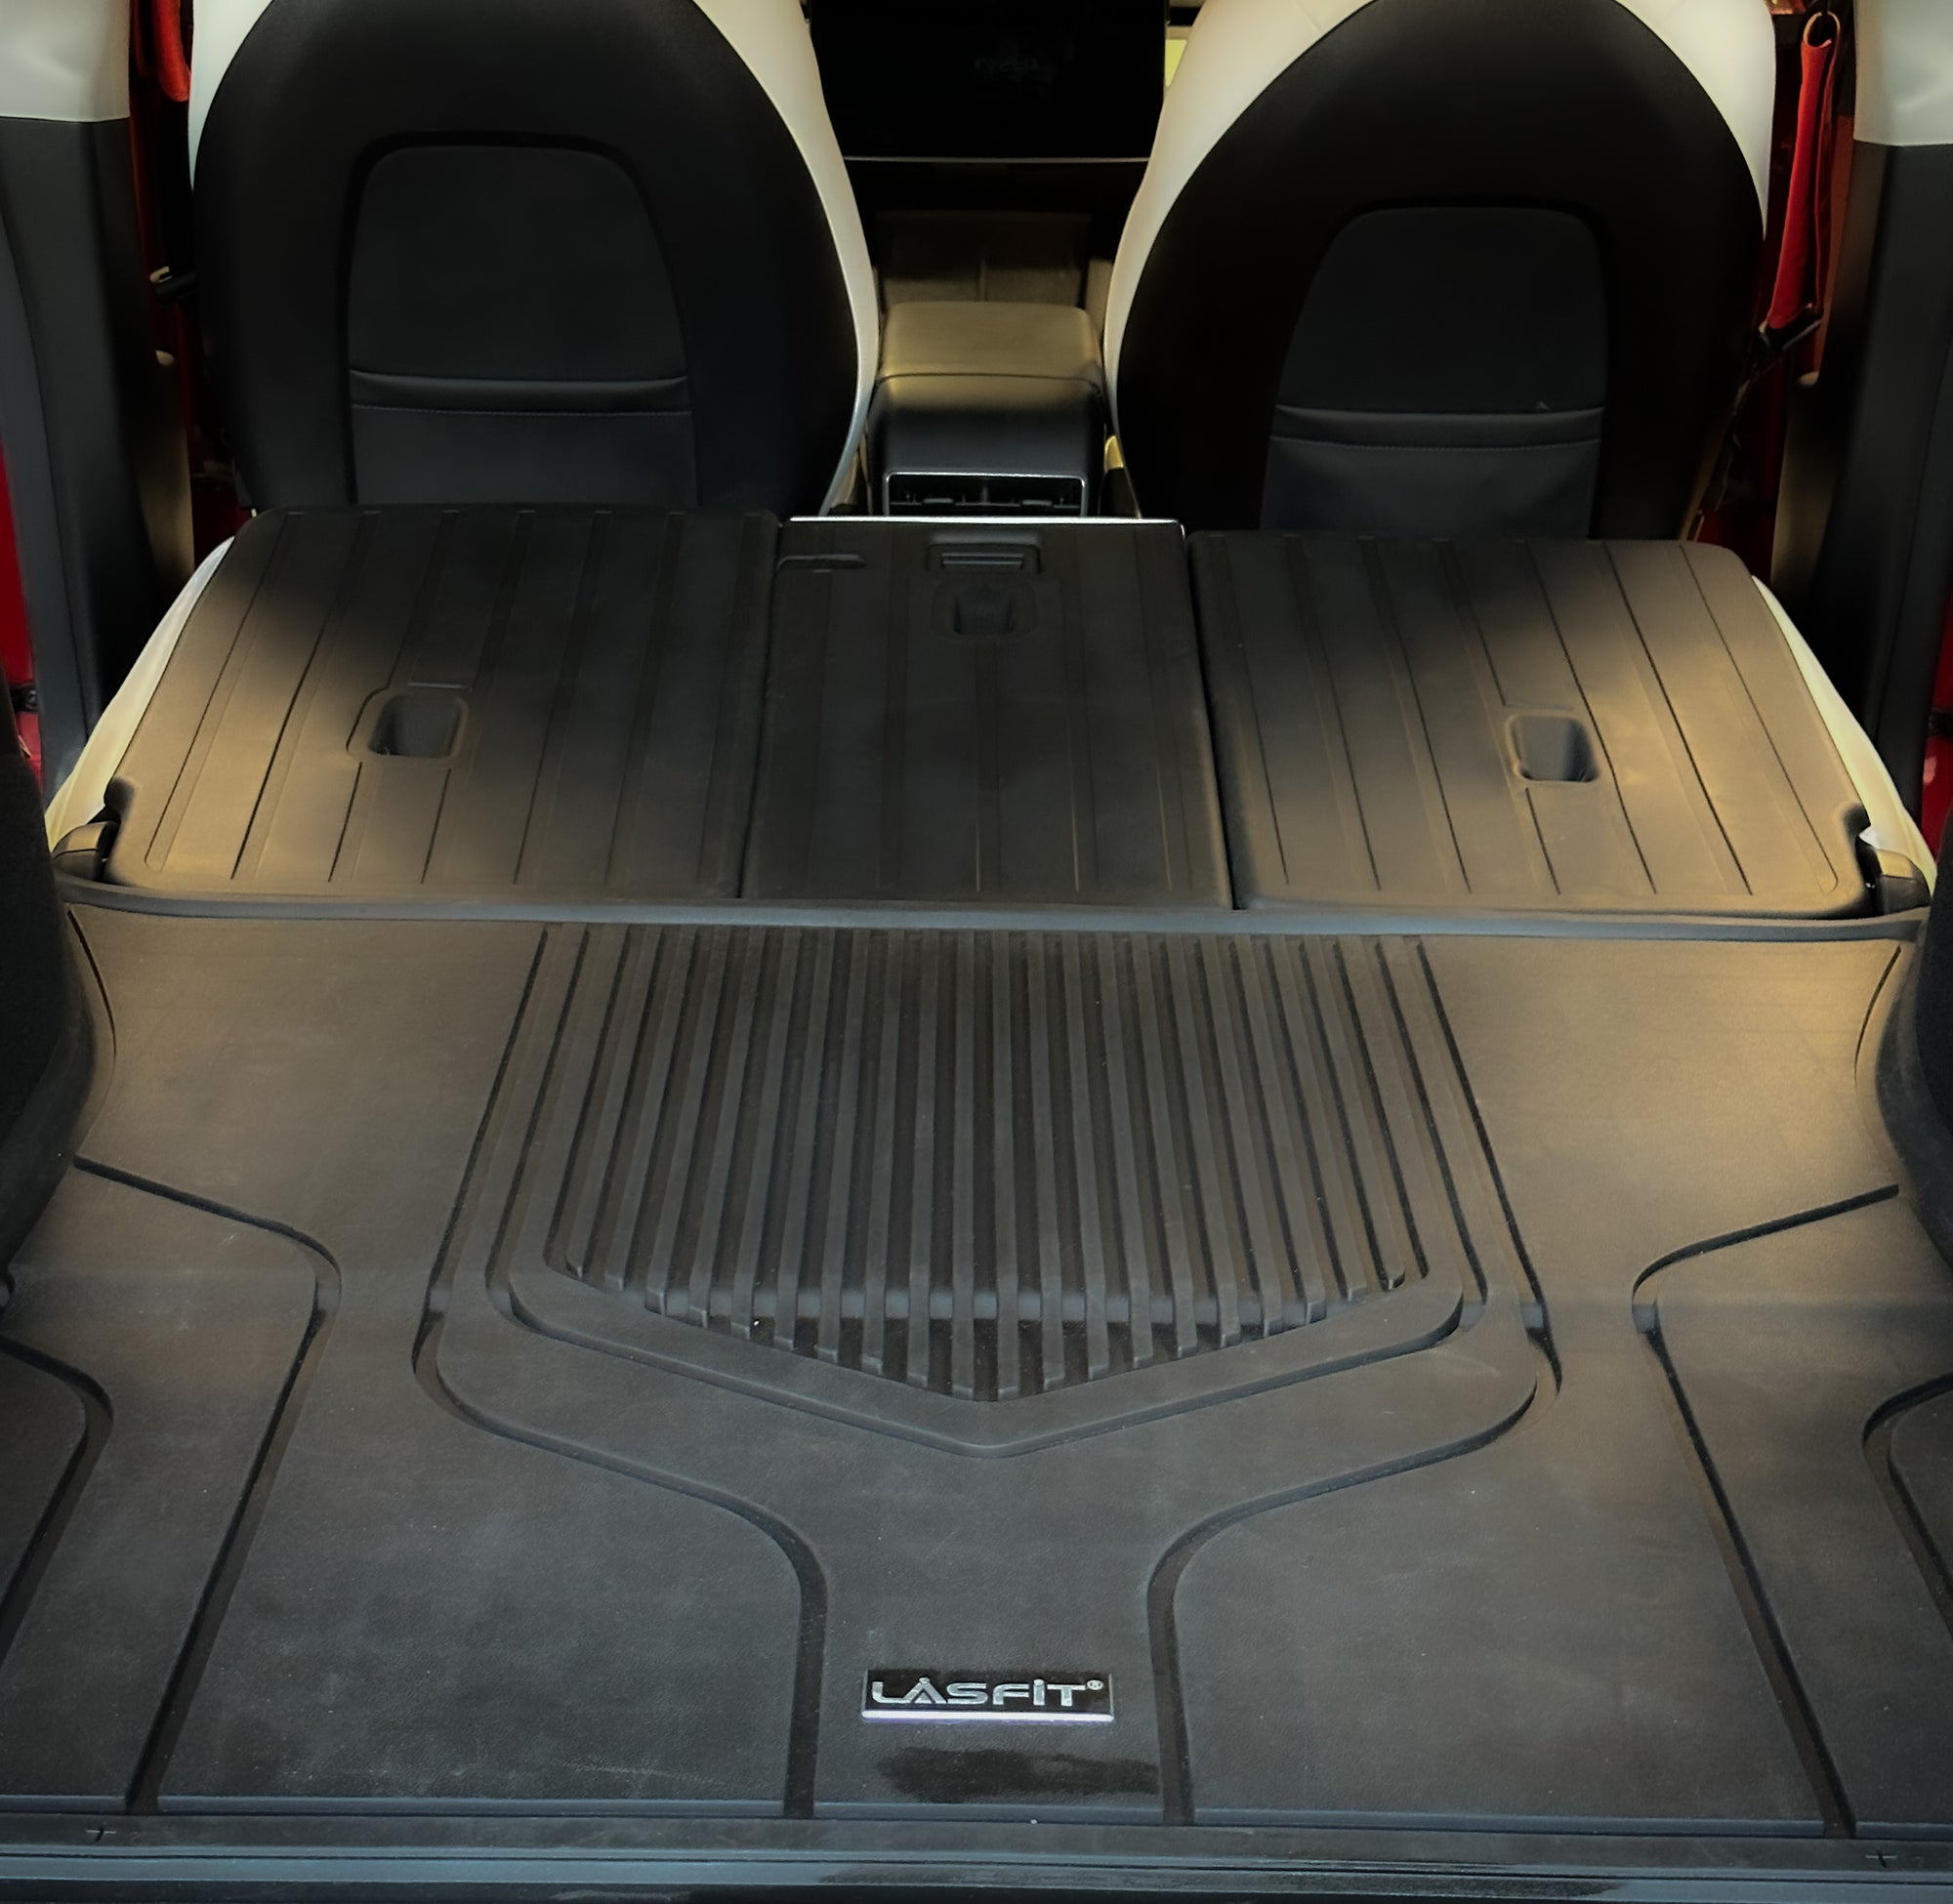 2befair protective mats for the back of the Tesla rear seats Model